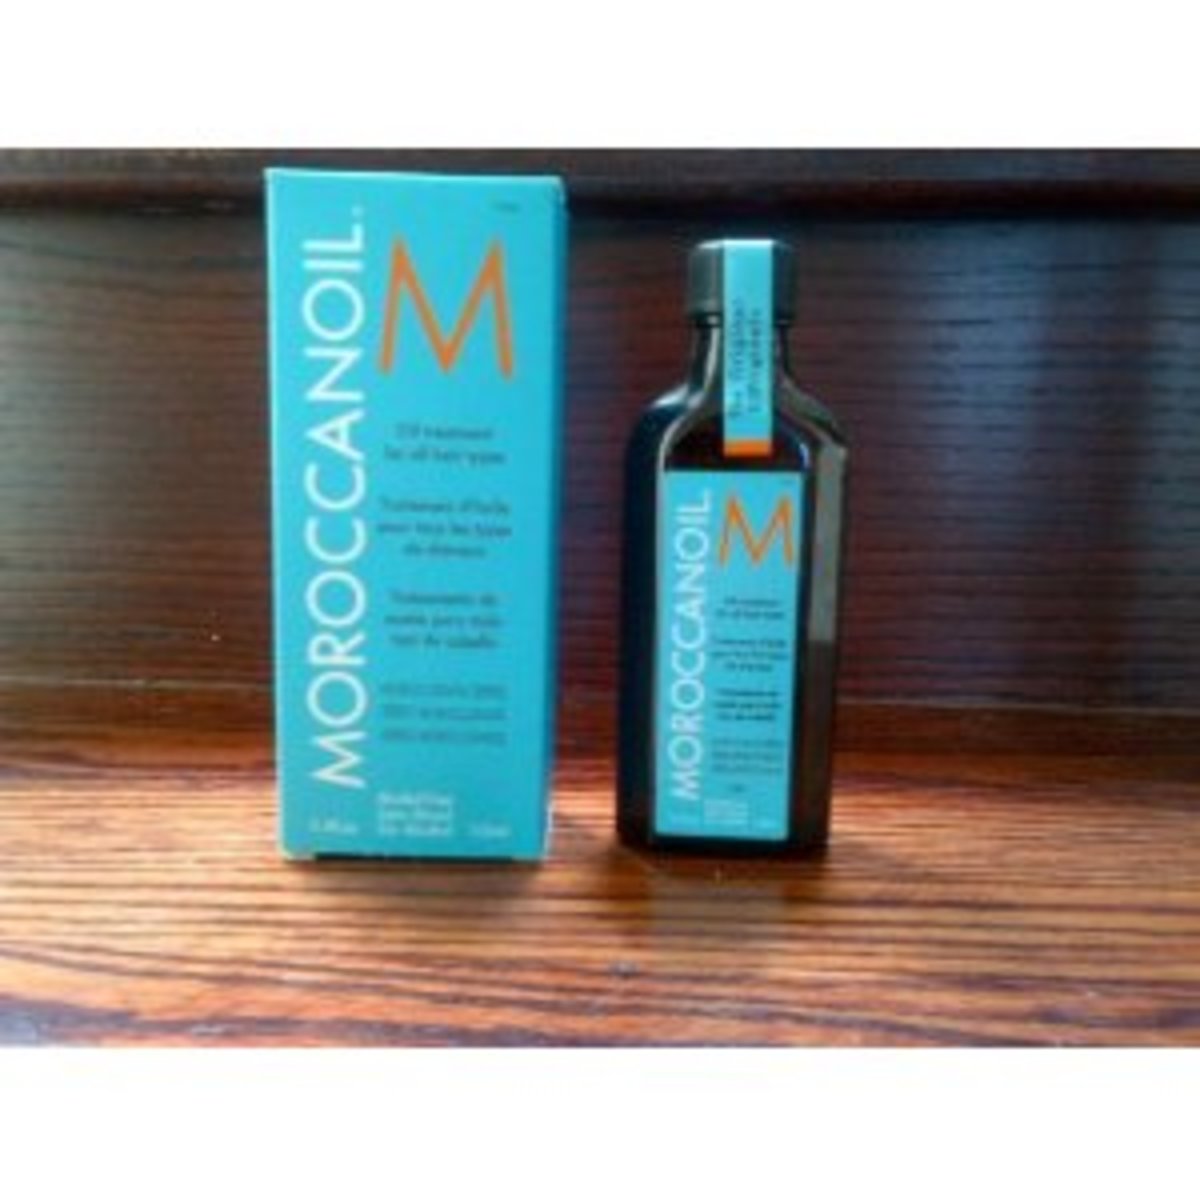 Moroccan Oil vs Coconut Oil - Which One Tames Your Frizzy Locks Better?